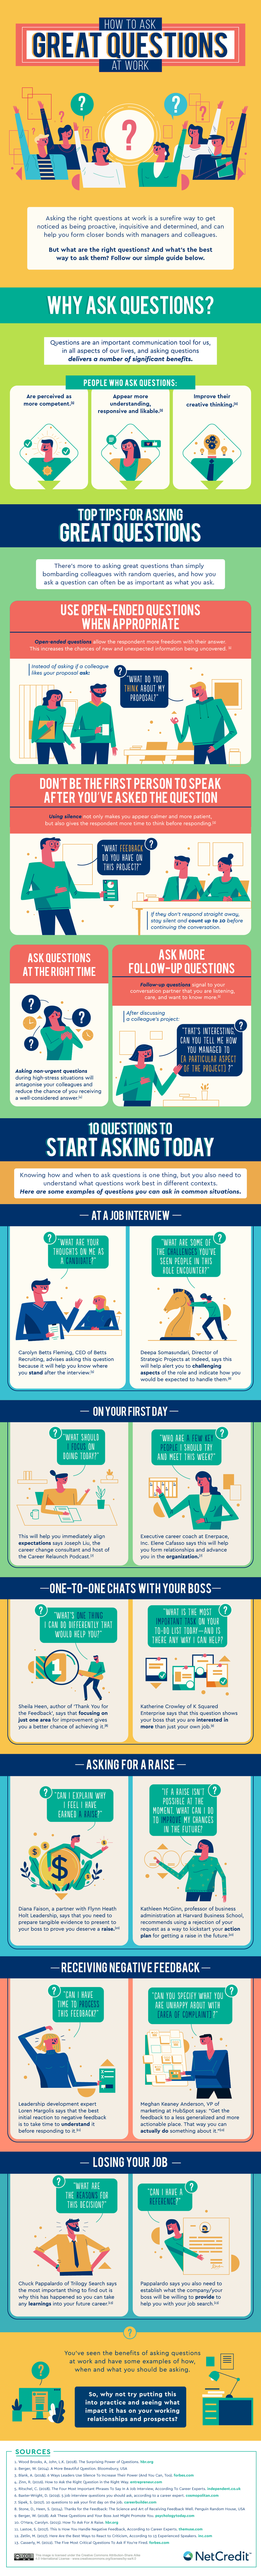 An infographic guide about excelling at asking questions at work. 